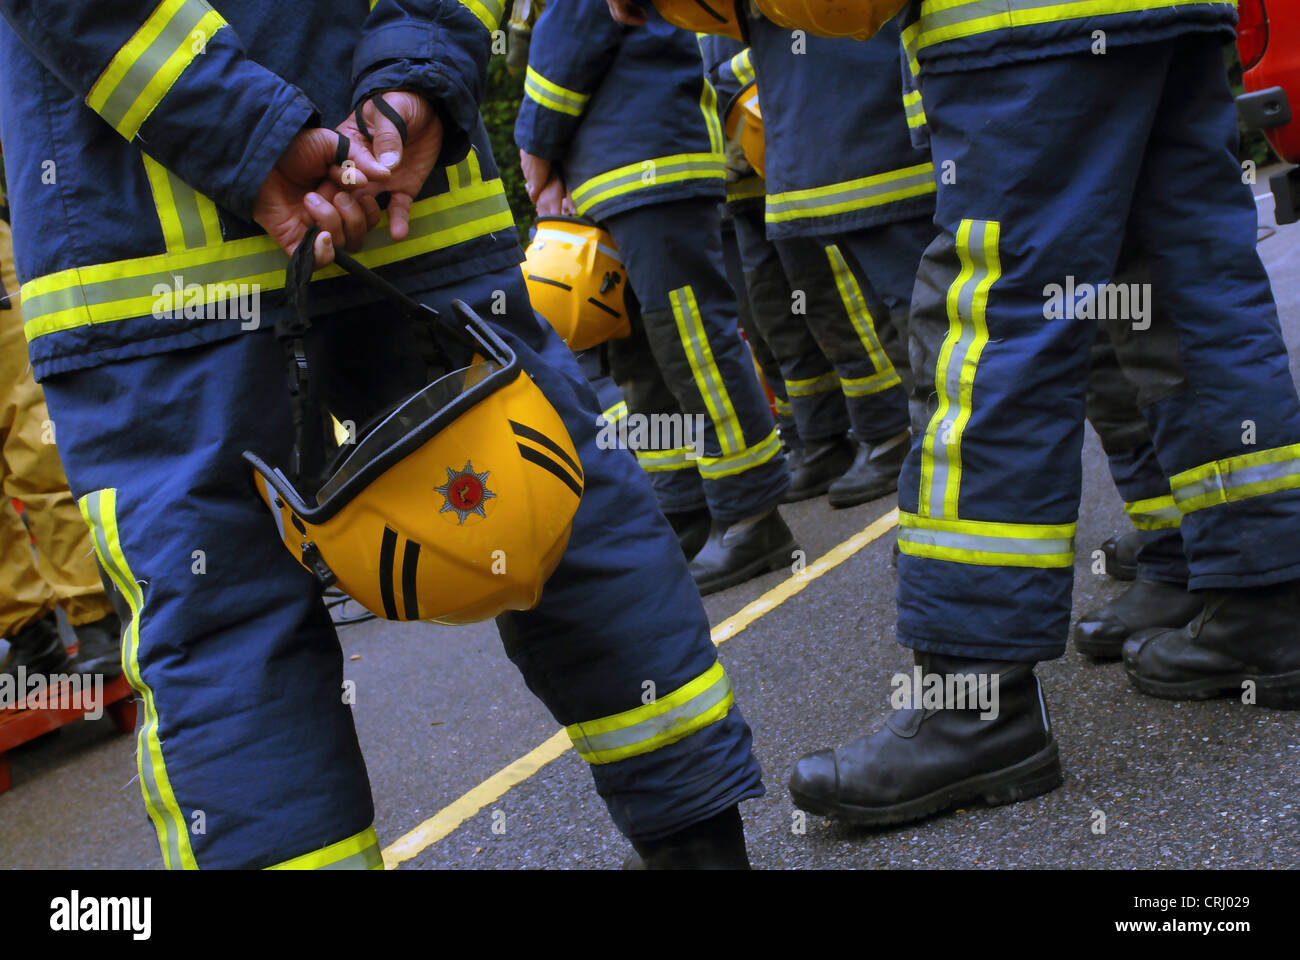 Firefighters stand in line (waist down). Stock Photo